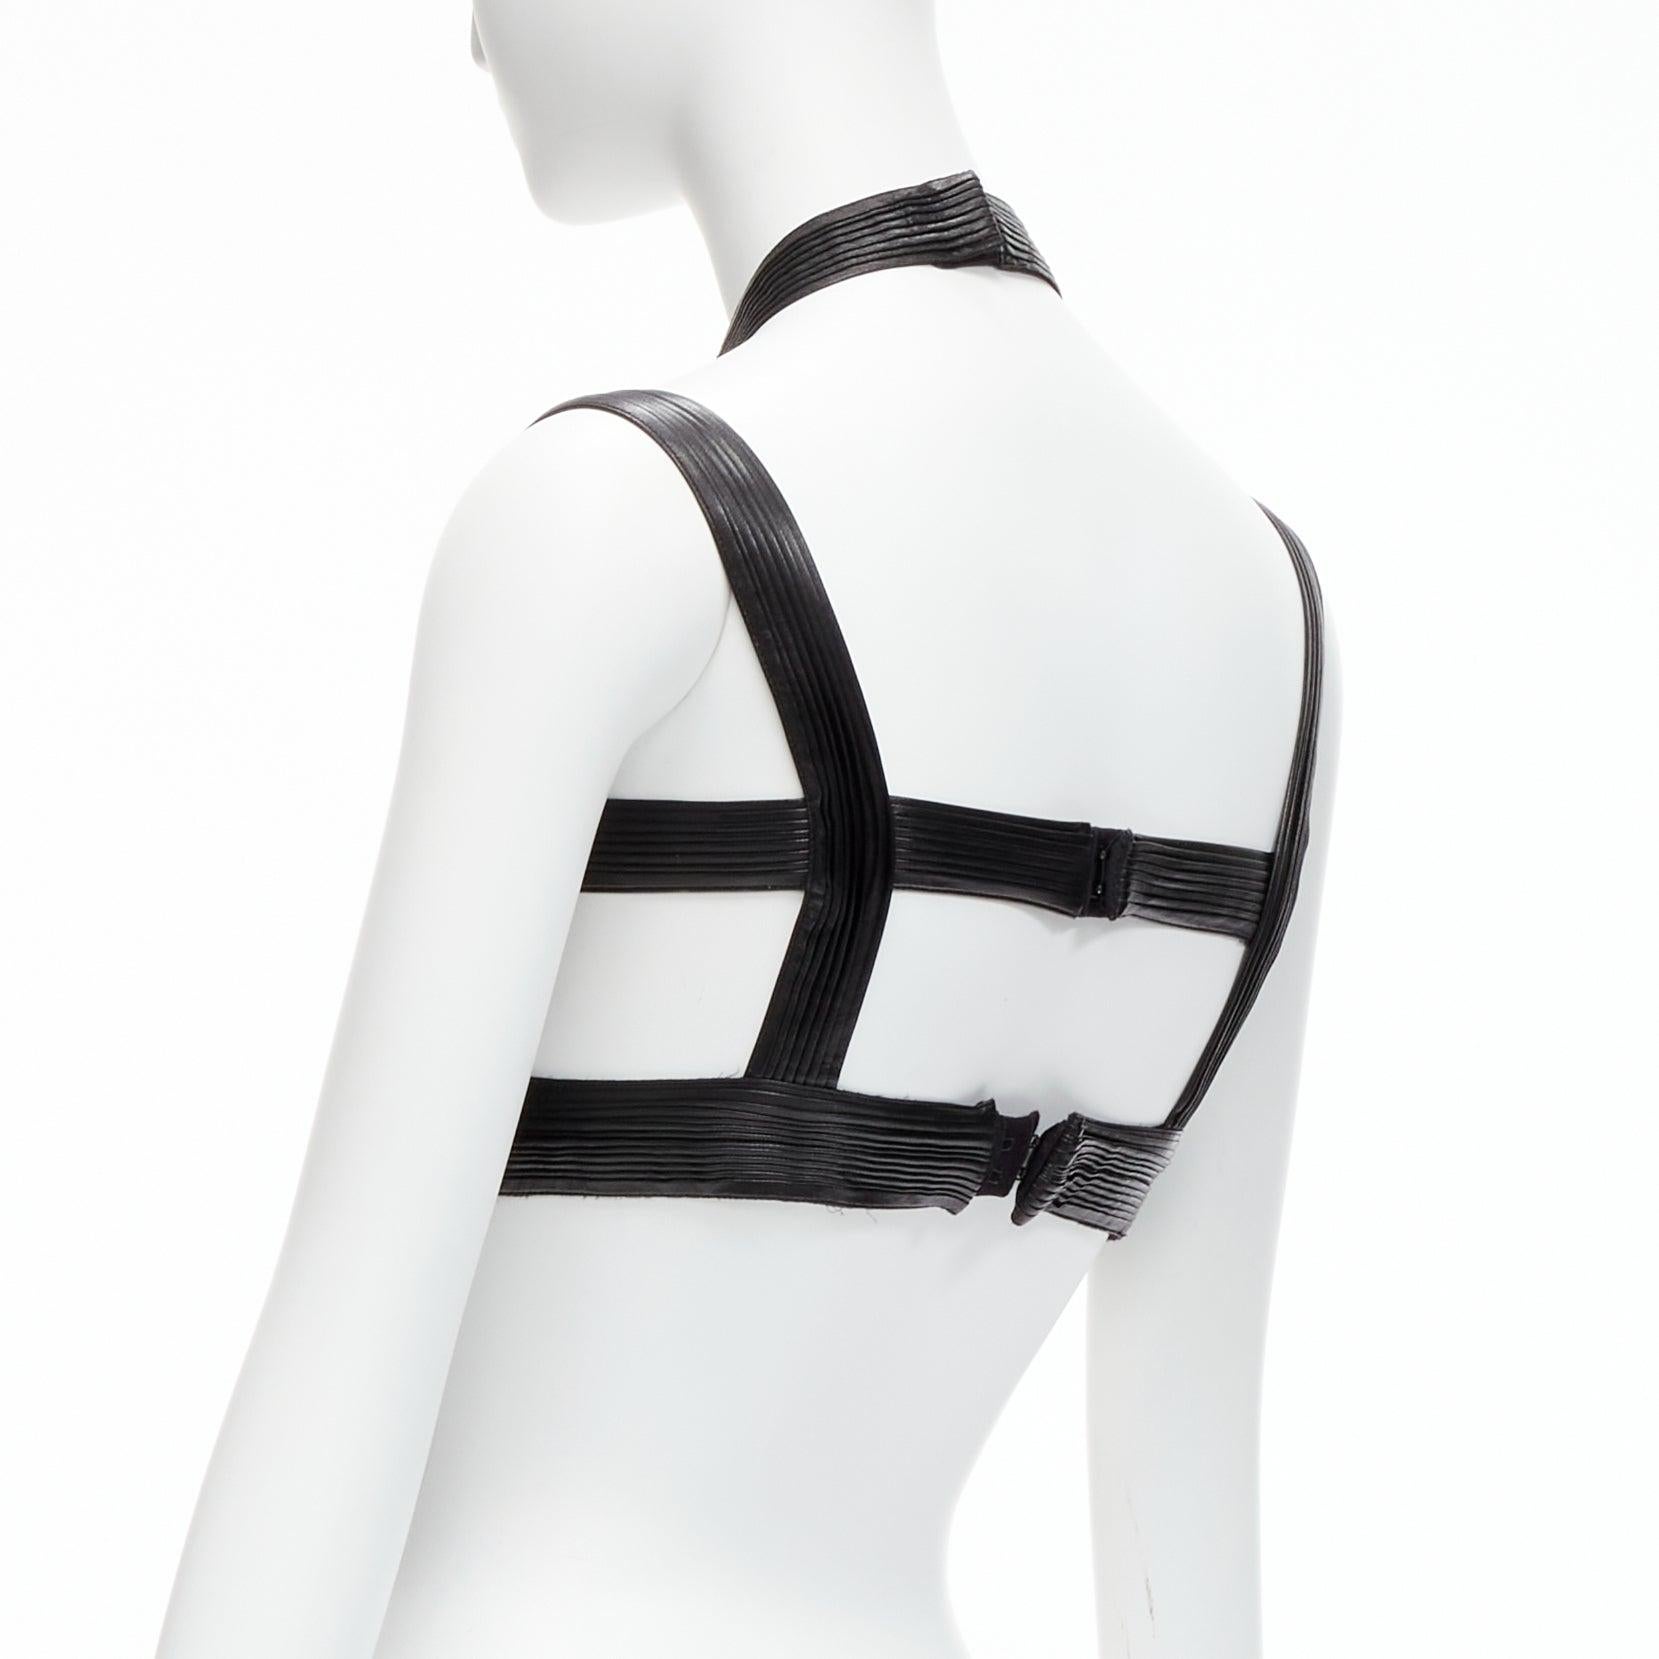 rare GIVENCHY Riccardo Tisci 2014 Runway leather pleated halter harness bra top For Sale 2